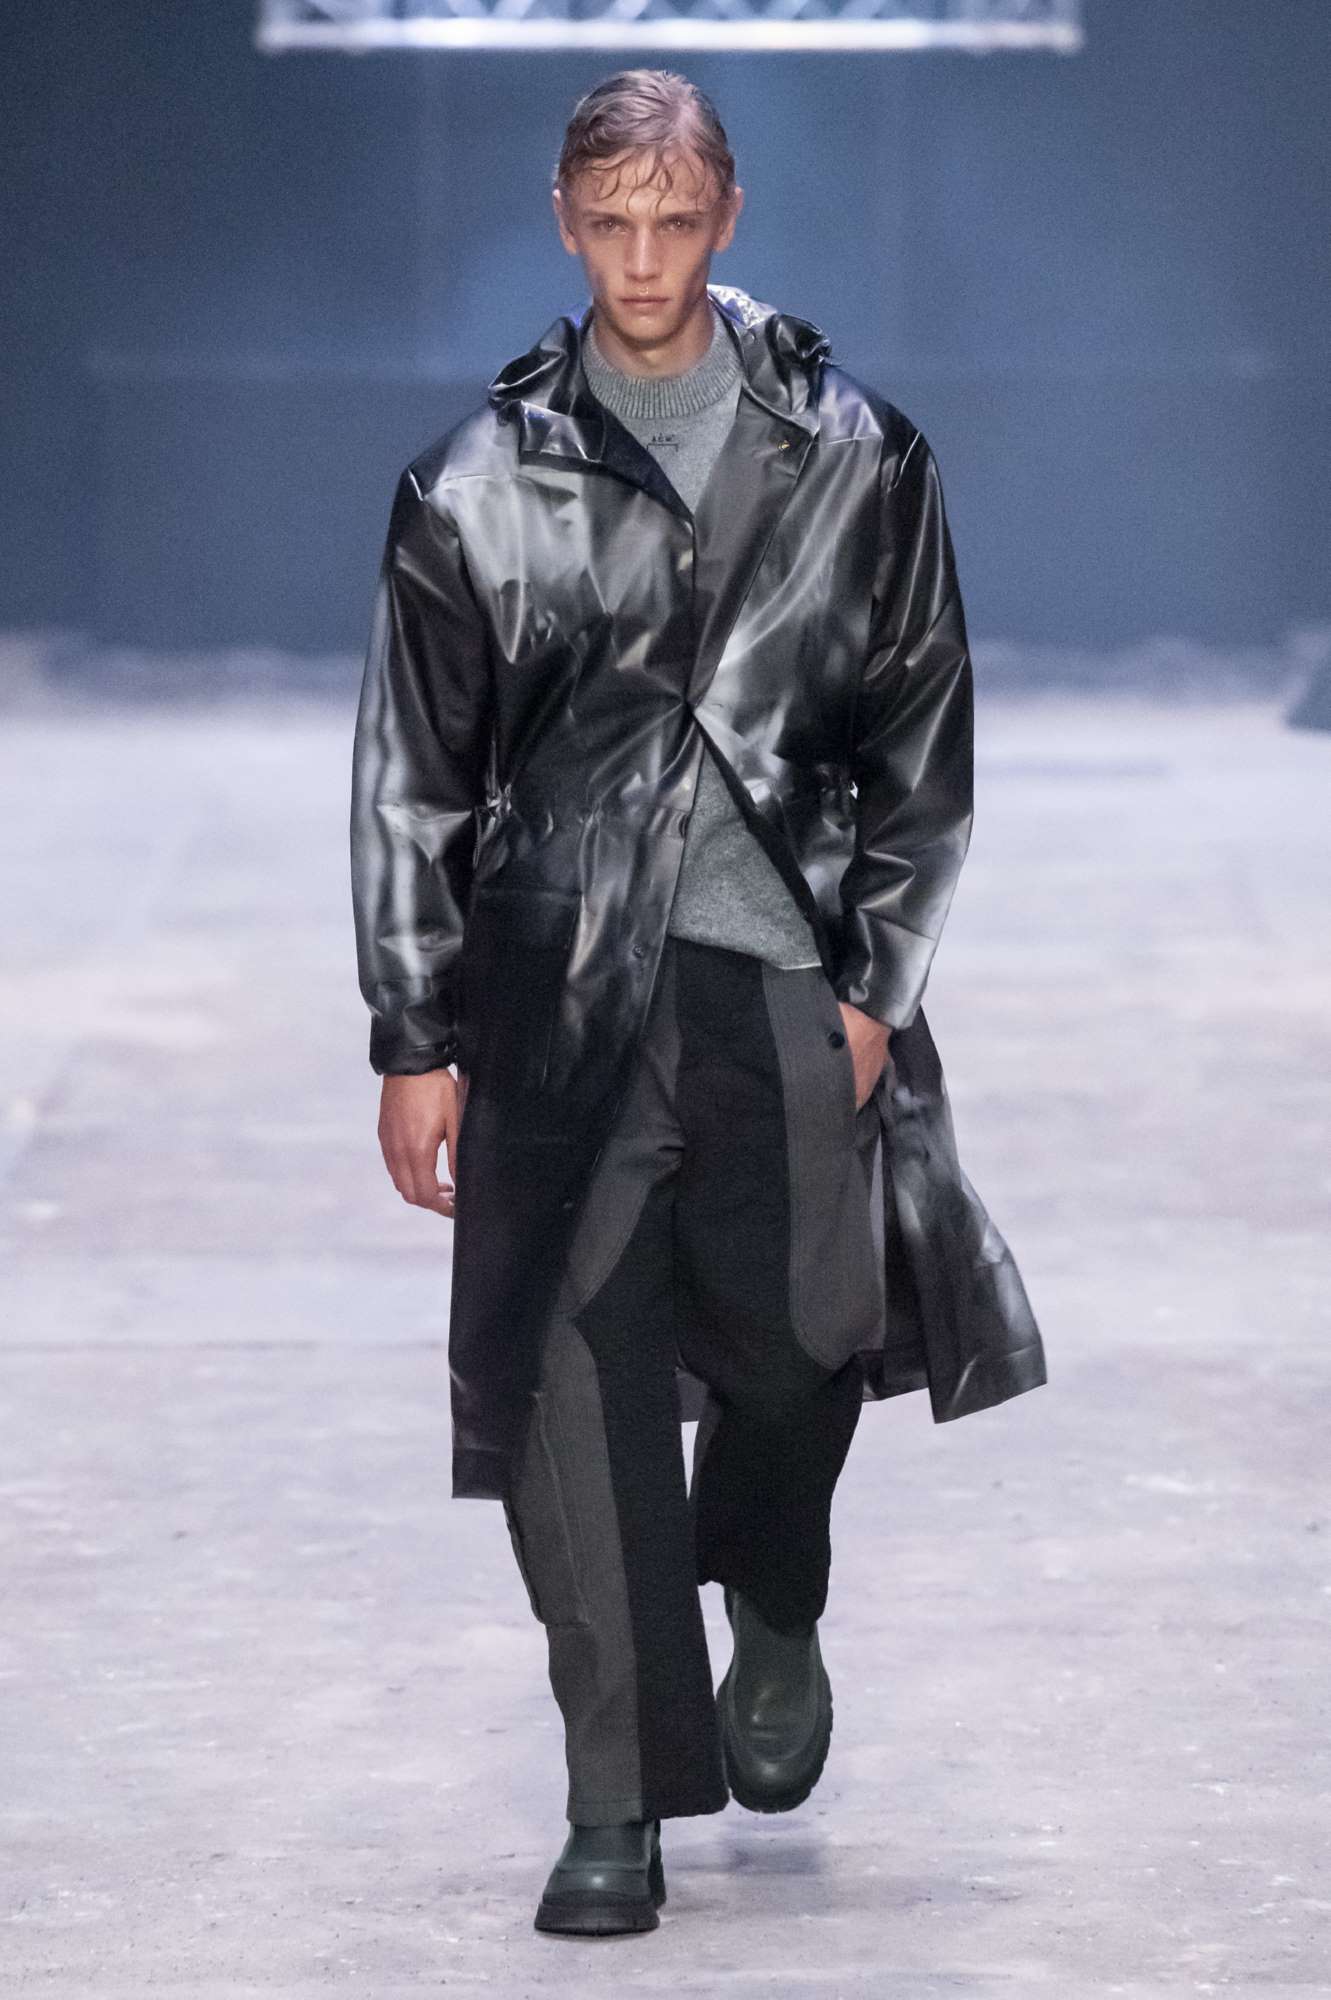 A-COLD-WALL* Spring-Summer 2020 - London Fashion Week Men's | Male ...